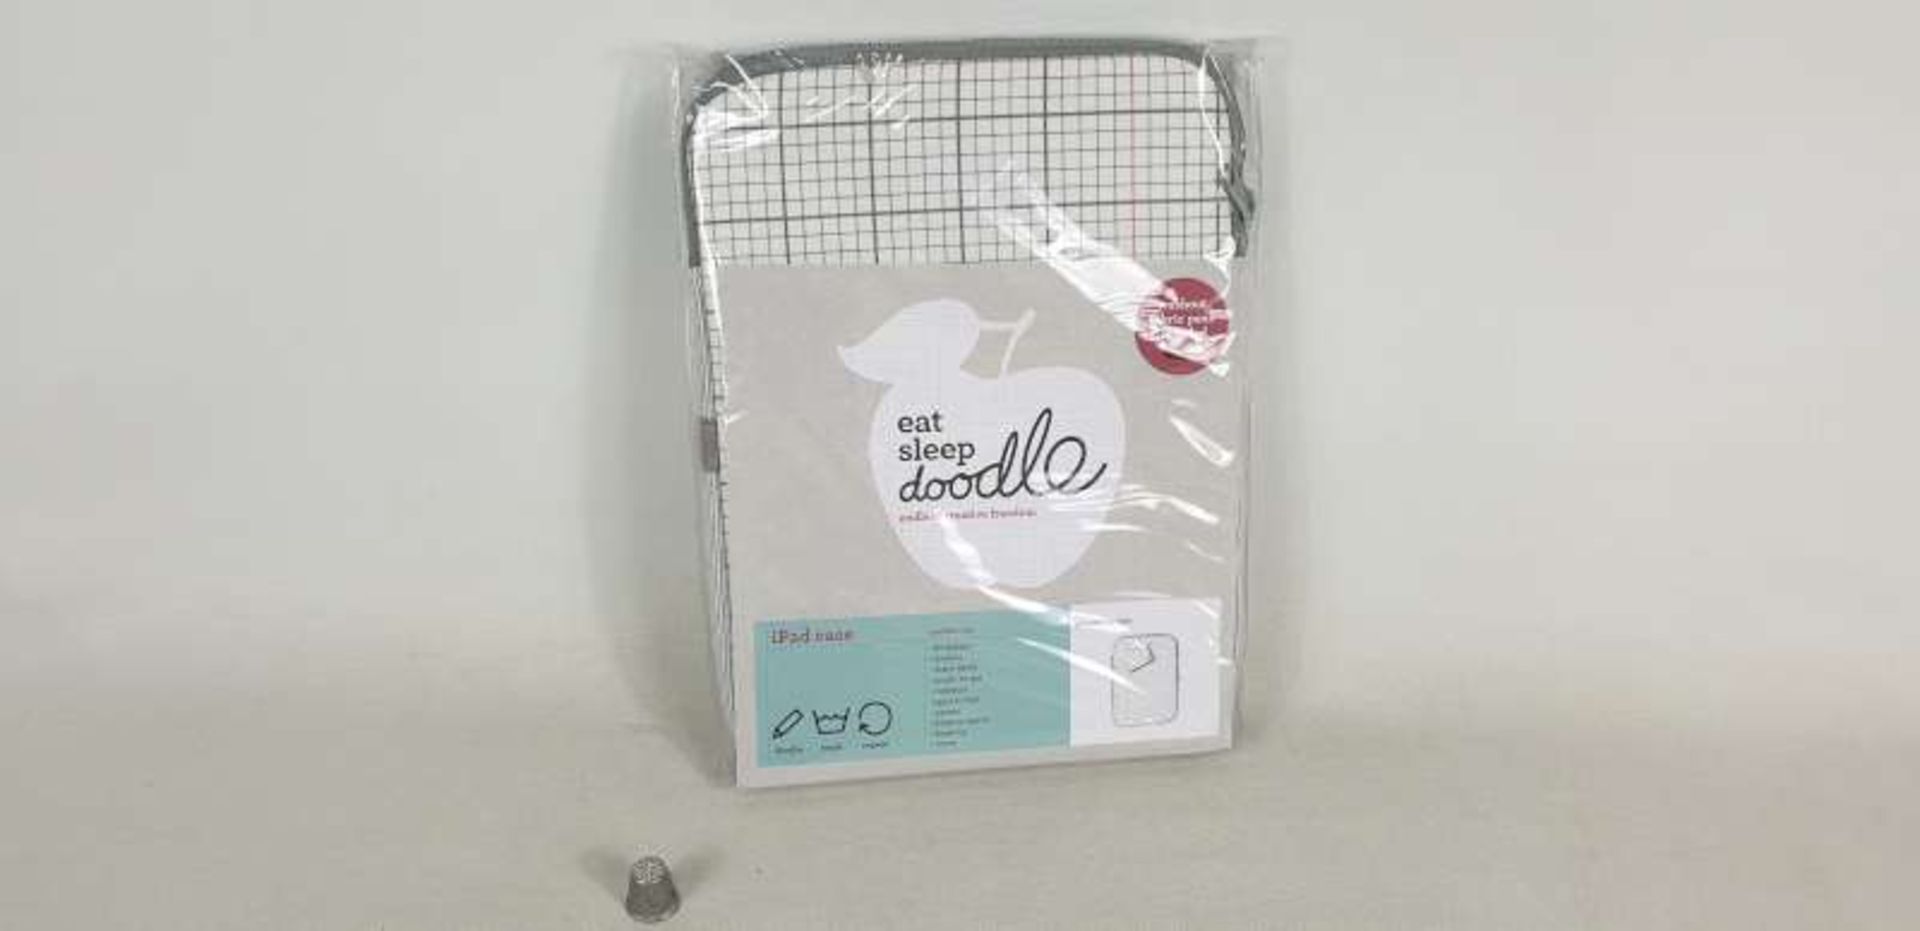 180 X DOODLE IPAD CASES IN 3 BOXES